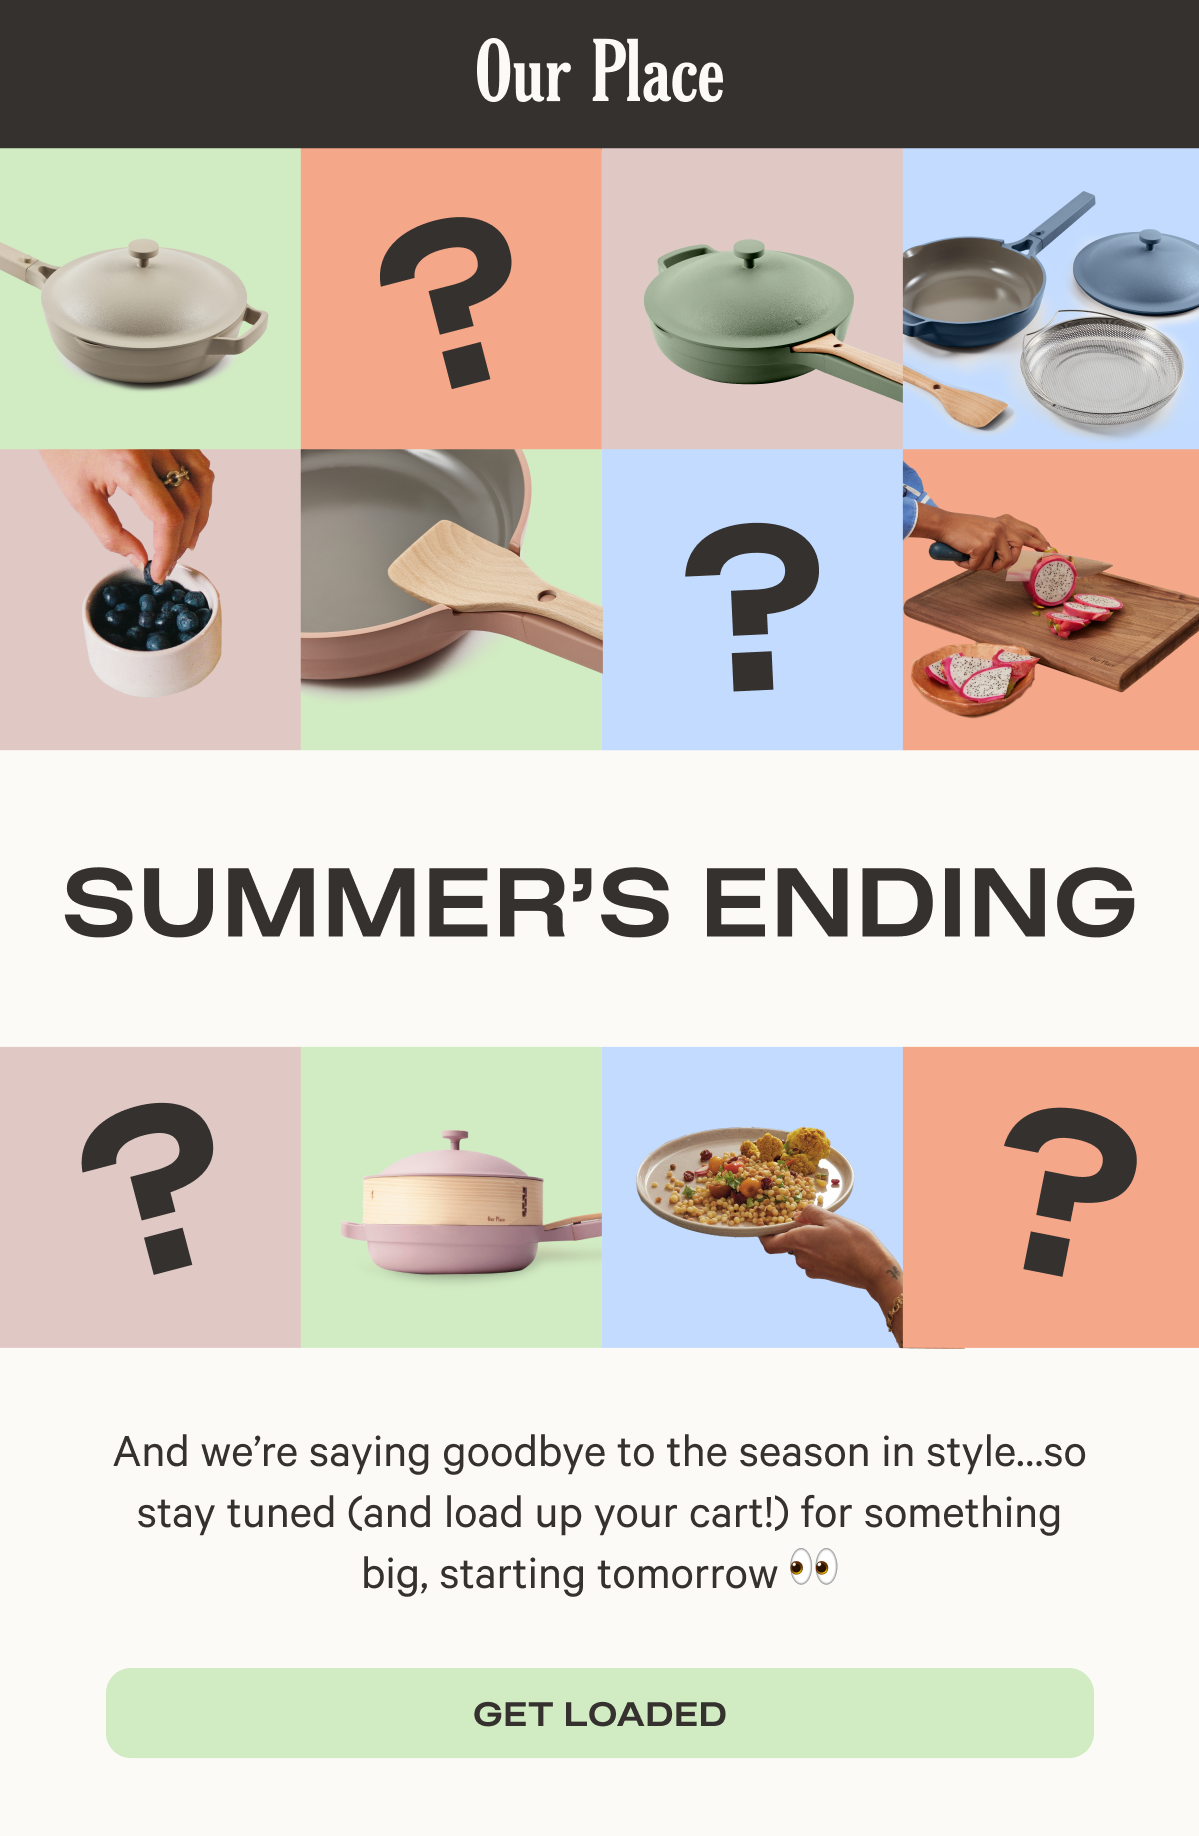 Our Place - Summer's Ending - And we’re saying goodbye to the season in style…so stay tuned (and load up your cart!) for something big, starting tomorrow - Get loaded